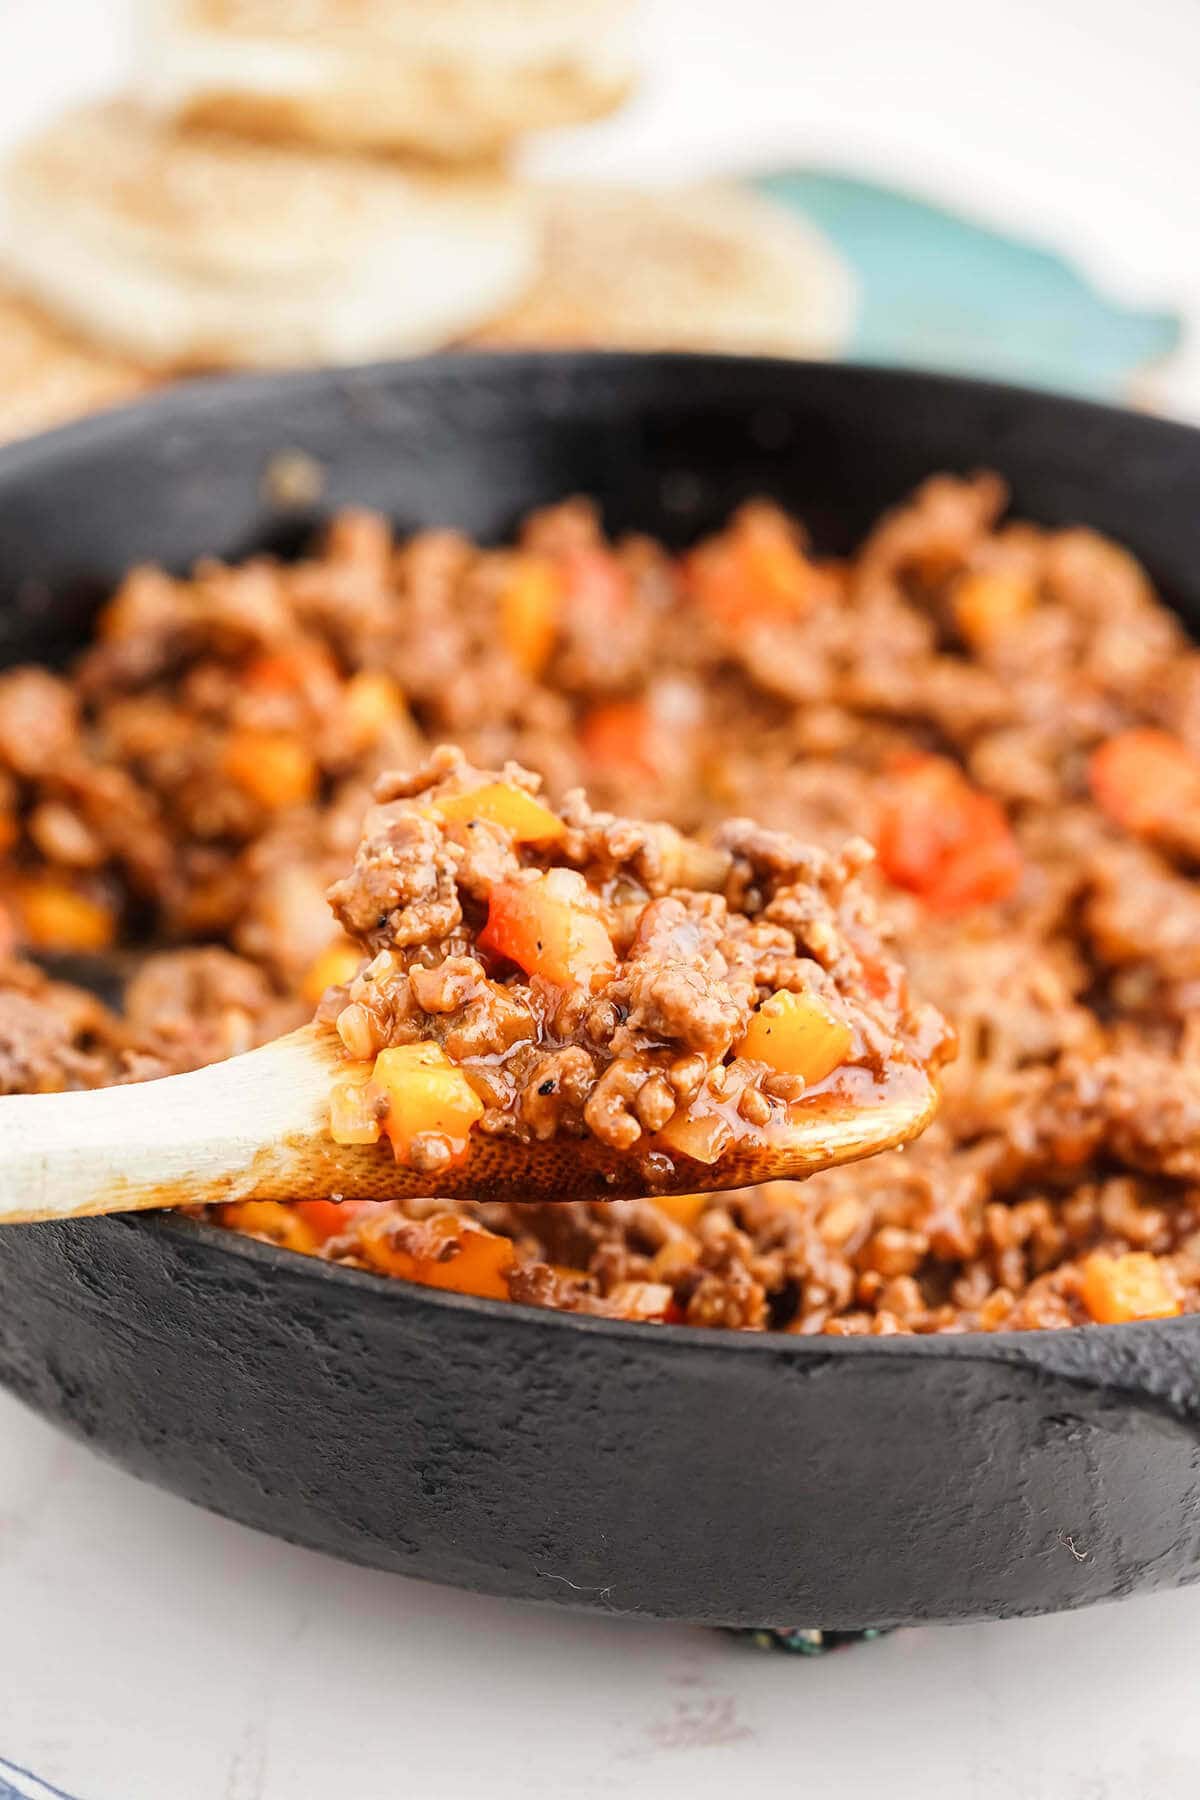 Cast iron skillet filled with old fashioned sloppy joes recipe, with serving spoon.